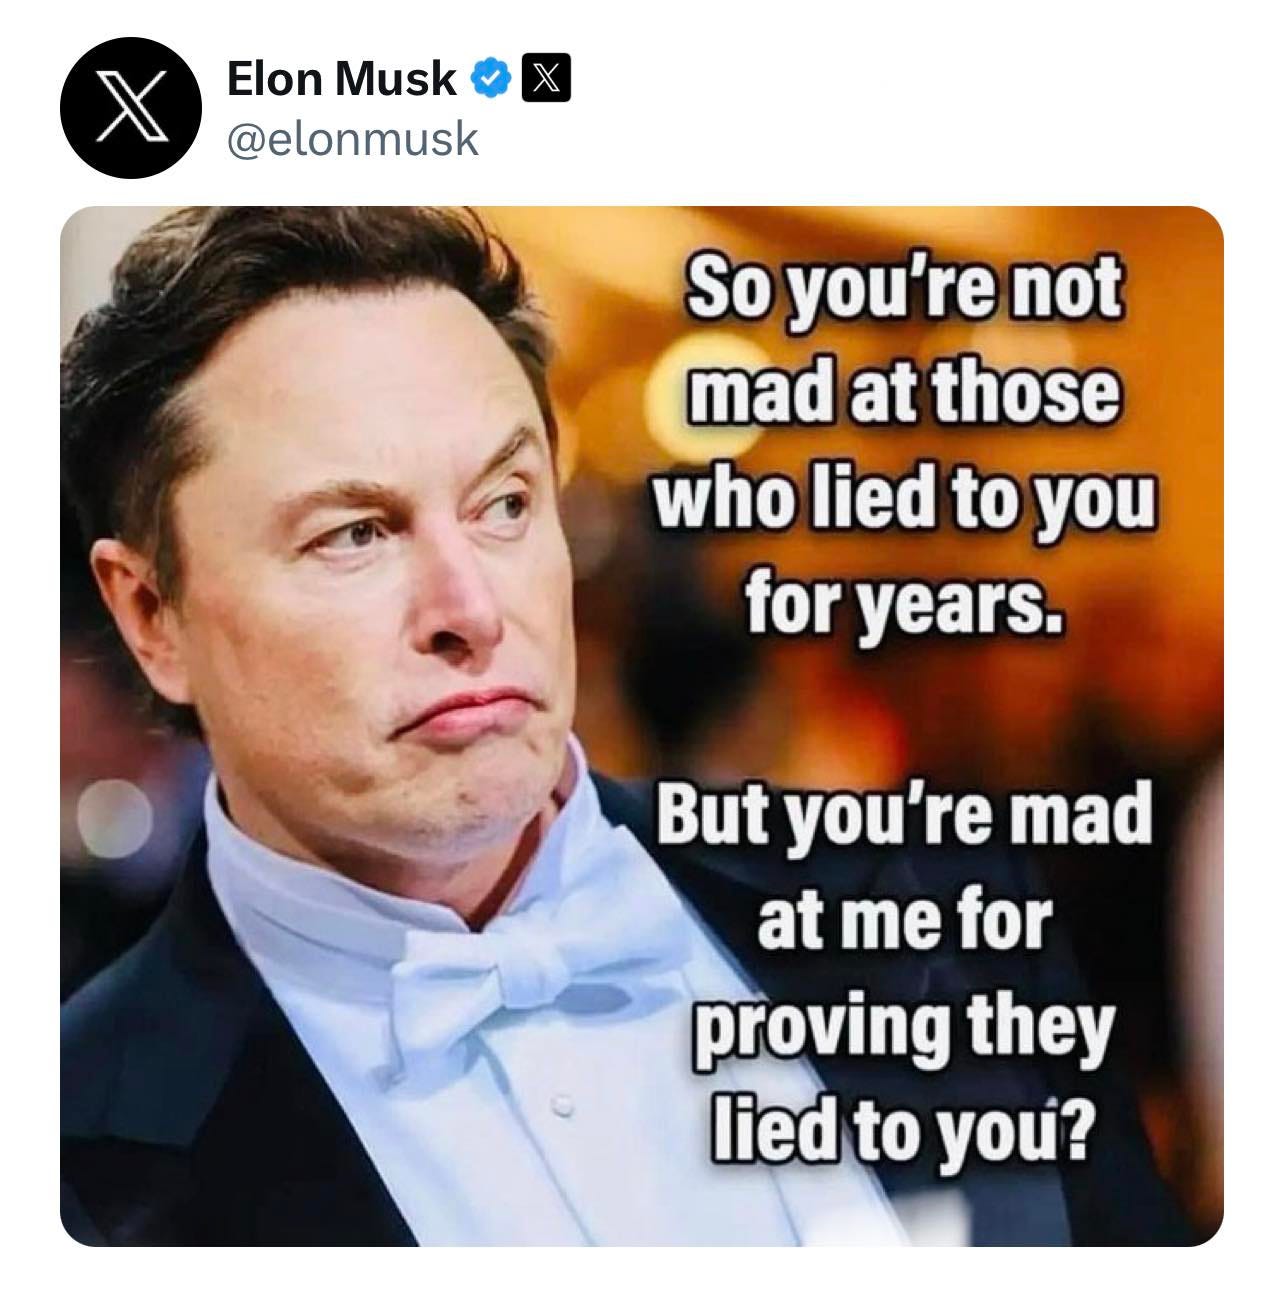 May be an image of 1 person and text that says 'Elon Musk @elonmusk So you're not mad at those who lied to you for years. But you're mad at me for proving they lied to you?'